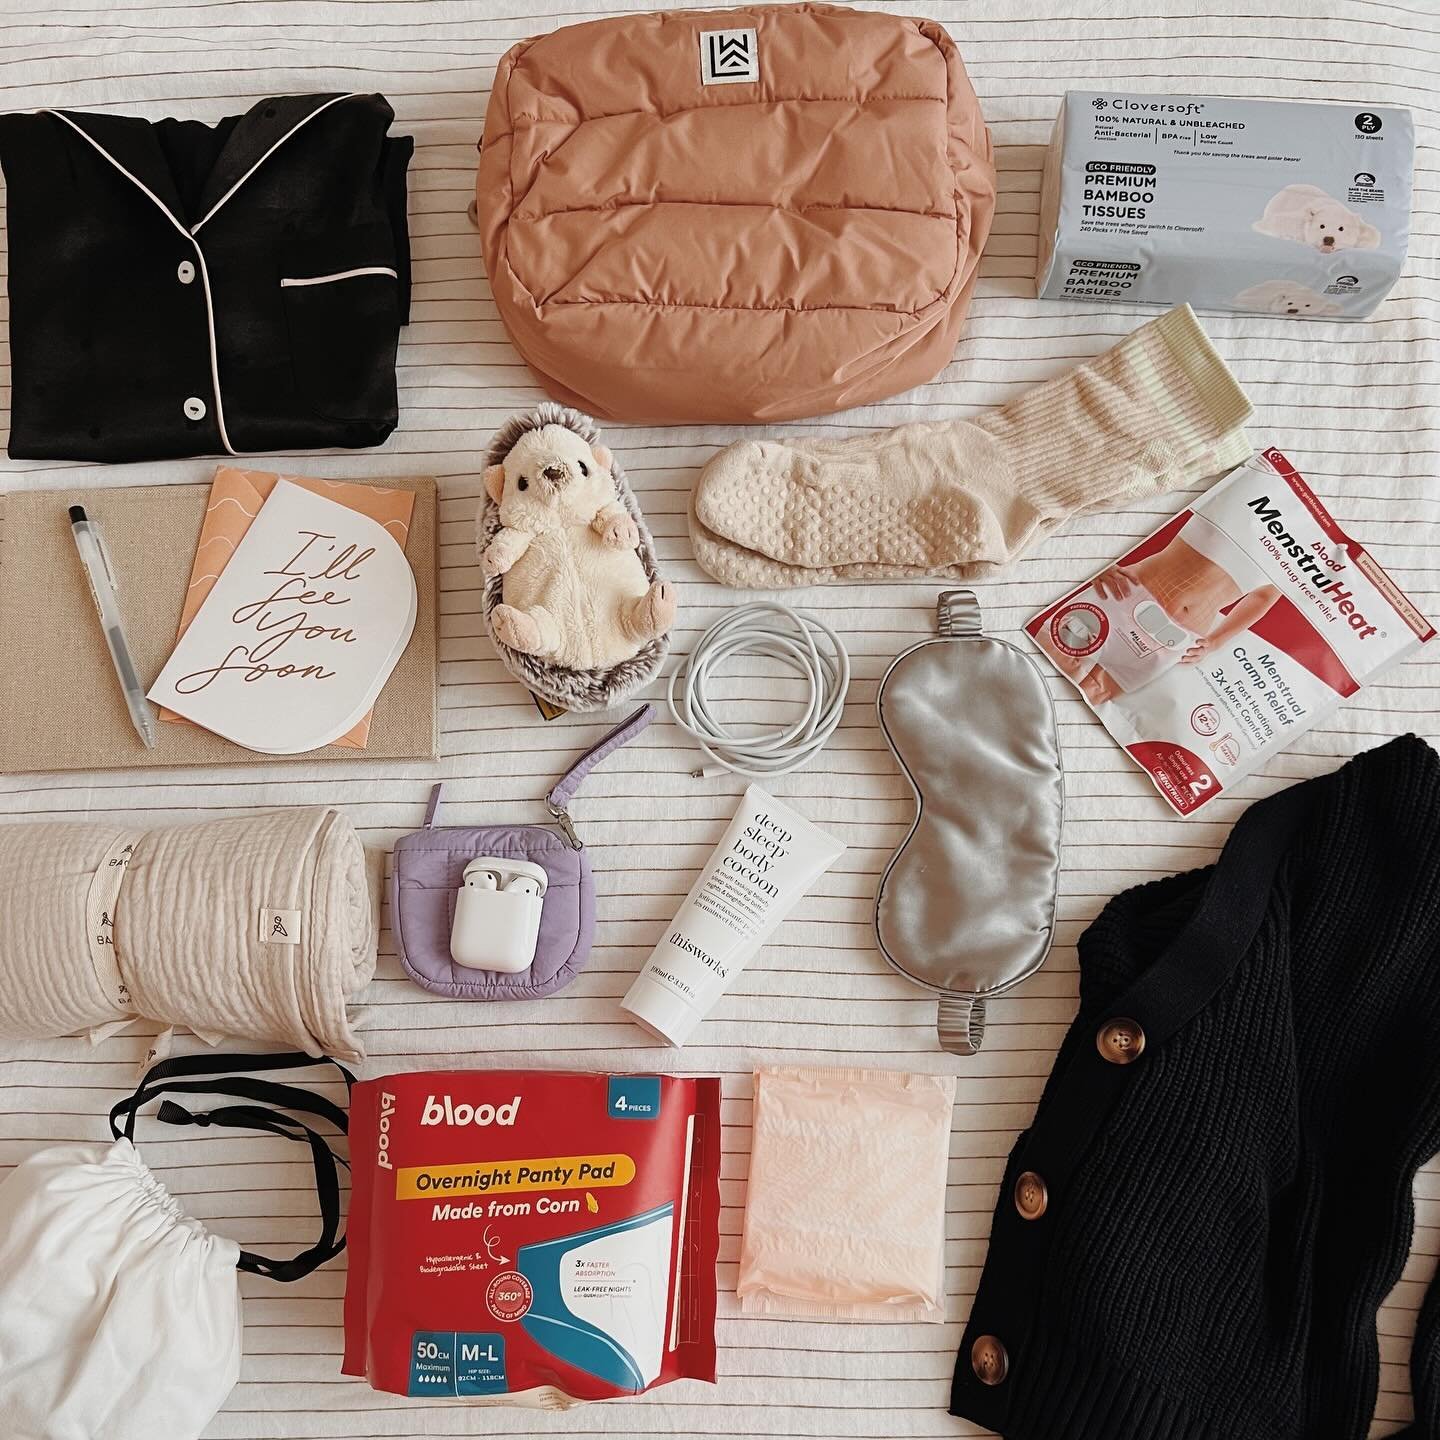 While we often see mums preparing their hospital bags for delivery, what about when the unexpected happens? Most of the time, everything is a blur and a rush. Putting together a bag for her hospital stay, can be incredibly helpful and comforting. 

S